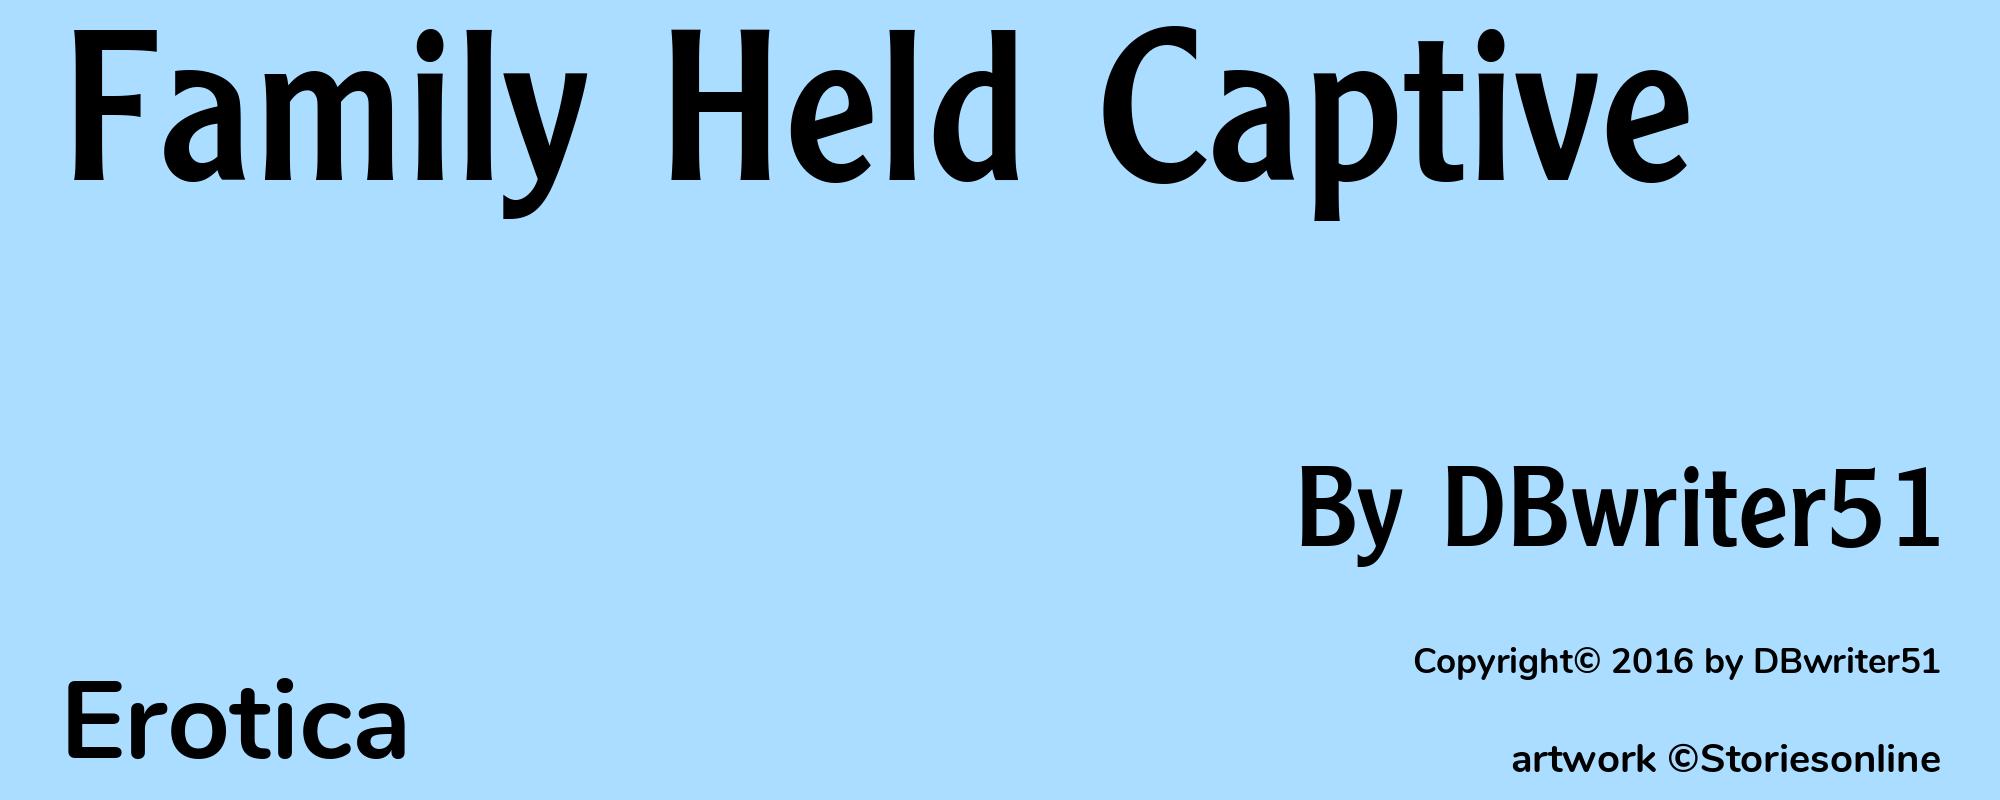 Family Held Captive - Cover